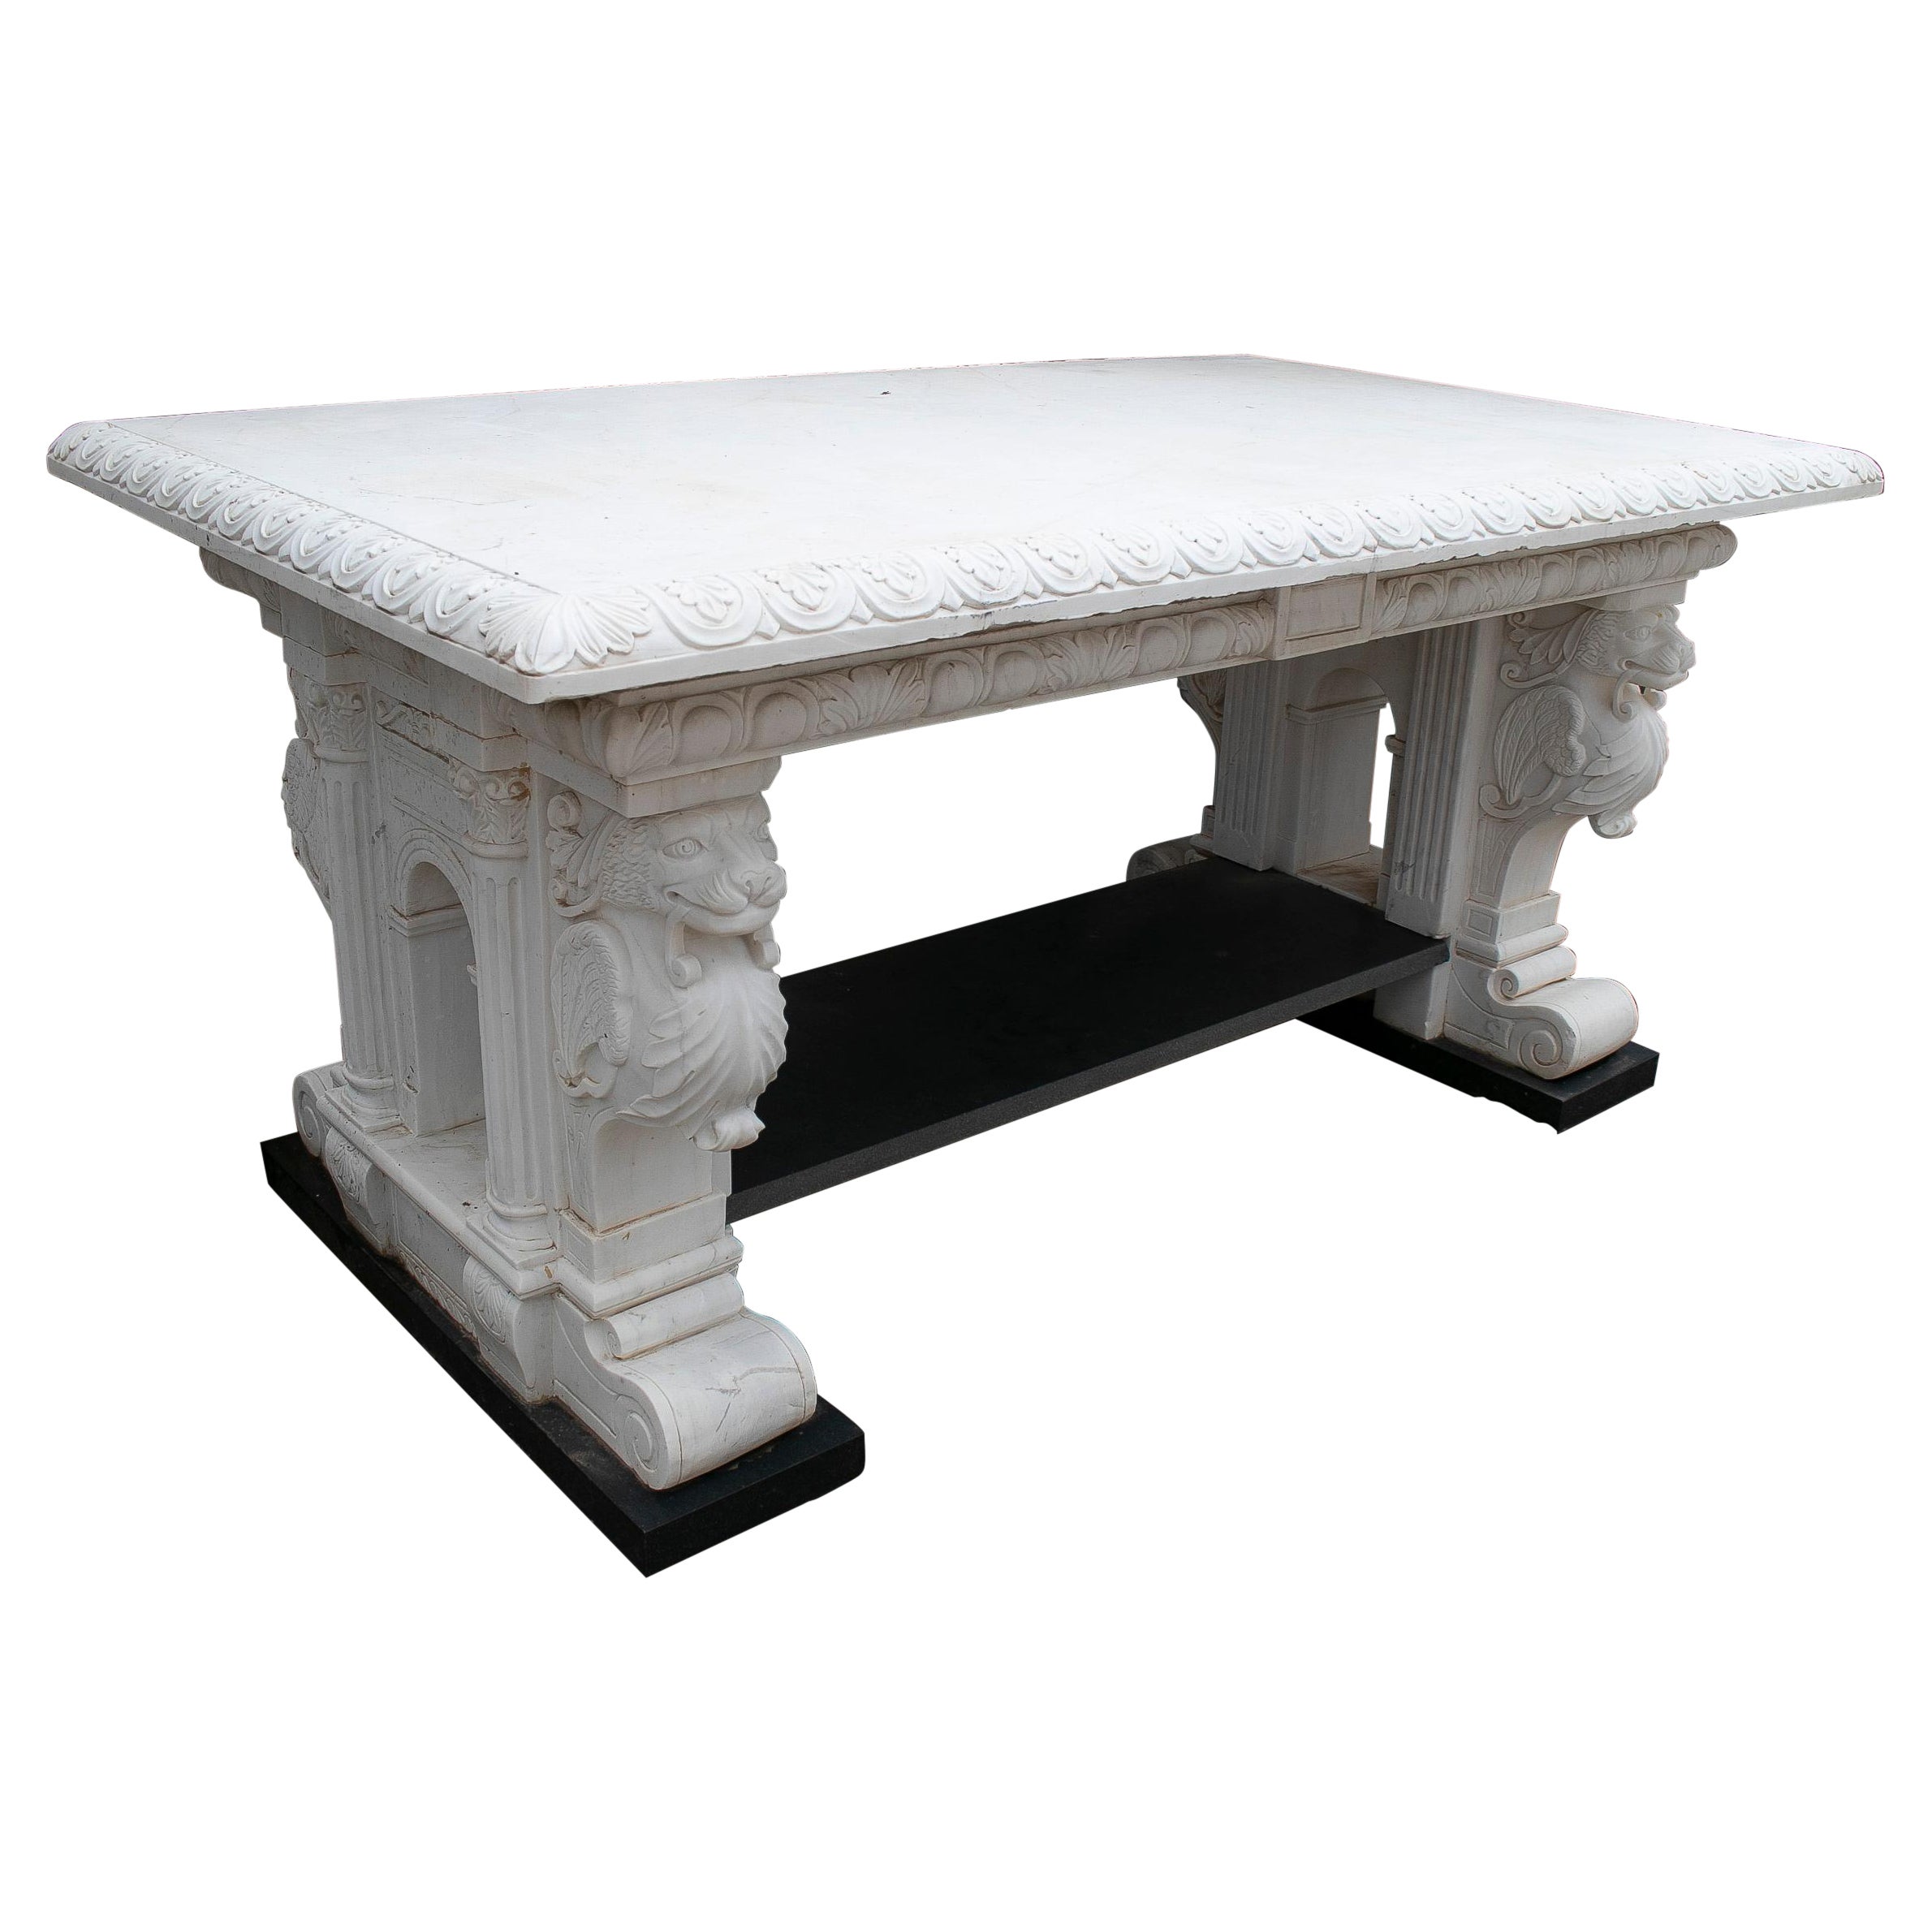 1990s European Hand Carved White & Black Marble Table w/ Lionheads For Sale